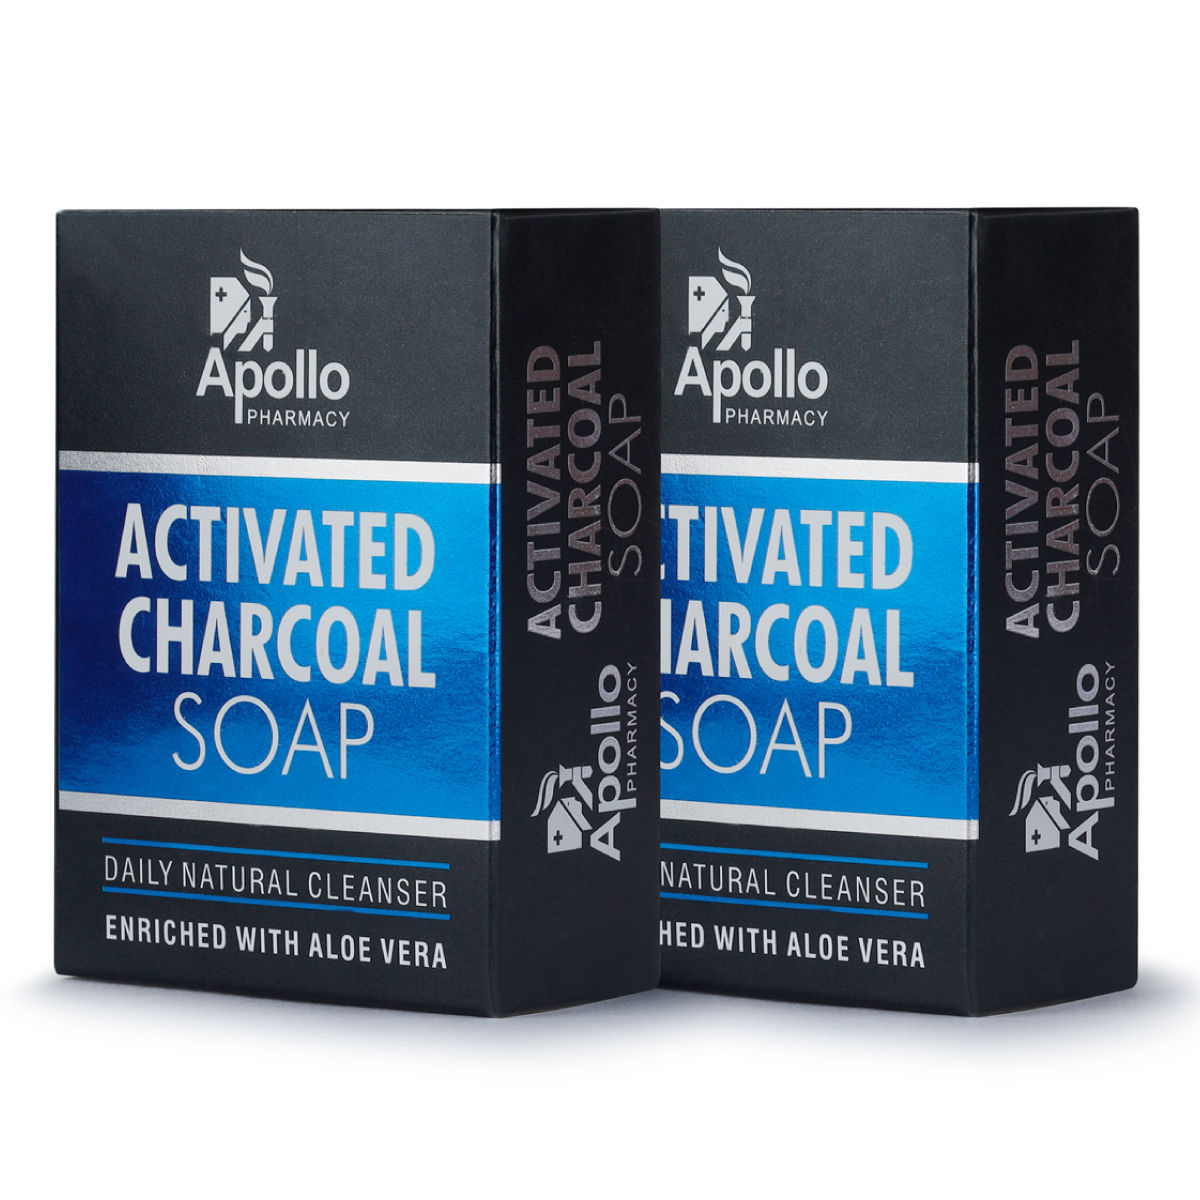 Buy Apollo Pharmacy Activated Charcoal Soap, 250 gm (2x125 gm) Online